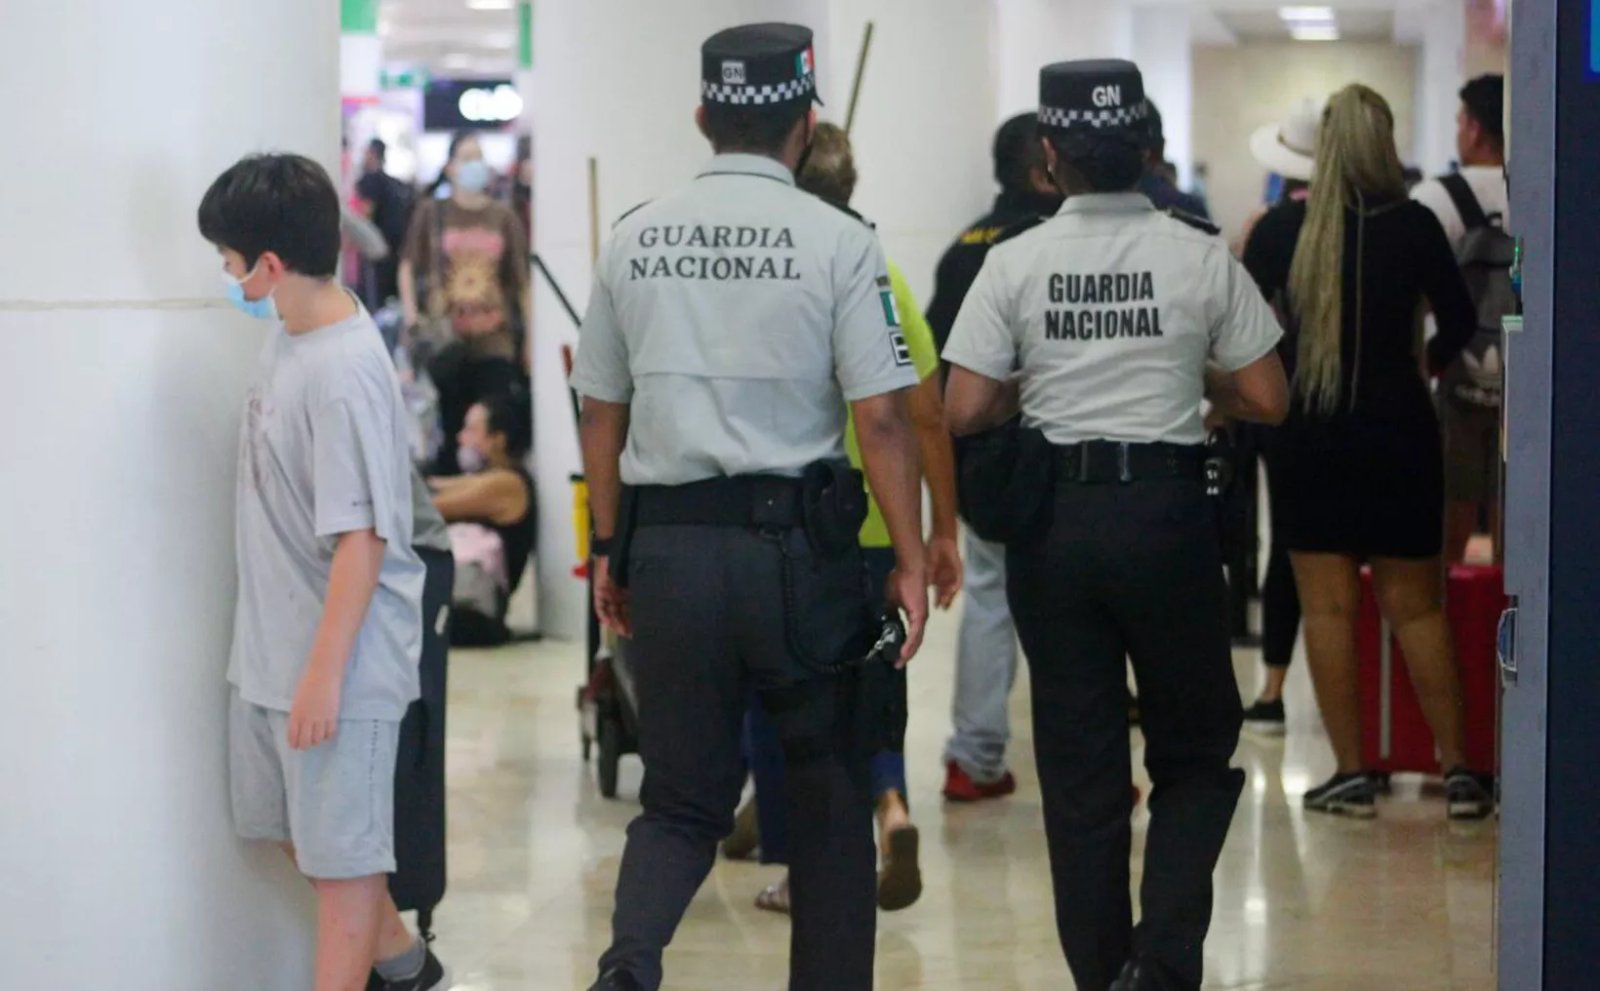 Two uniformed Guardia Nacional officers patrolling a crowded corridor with civilians, including a person wearing a face mask looking in their direction.